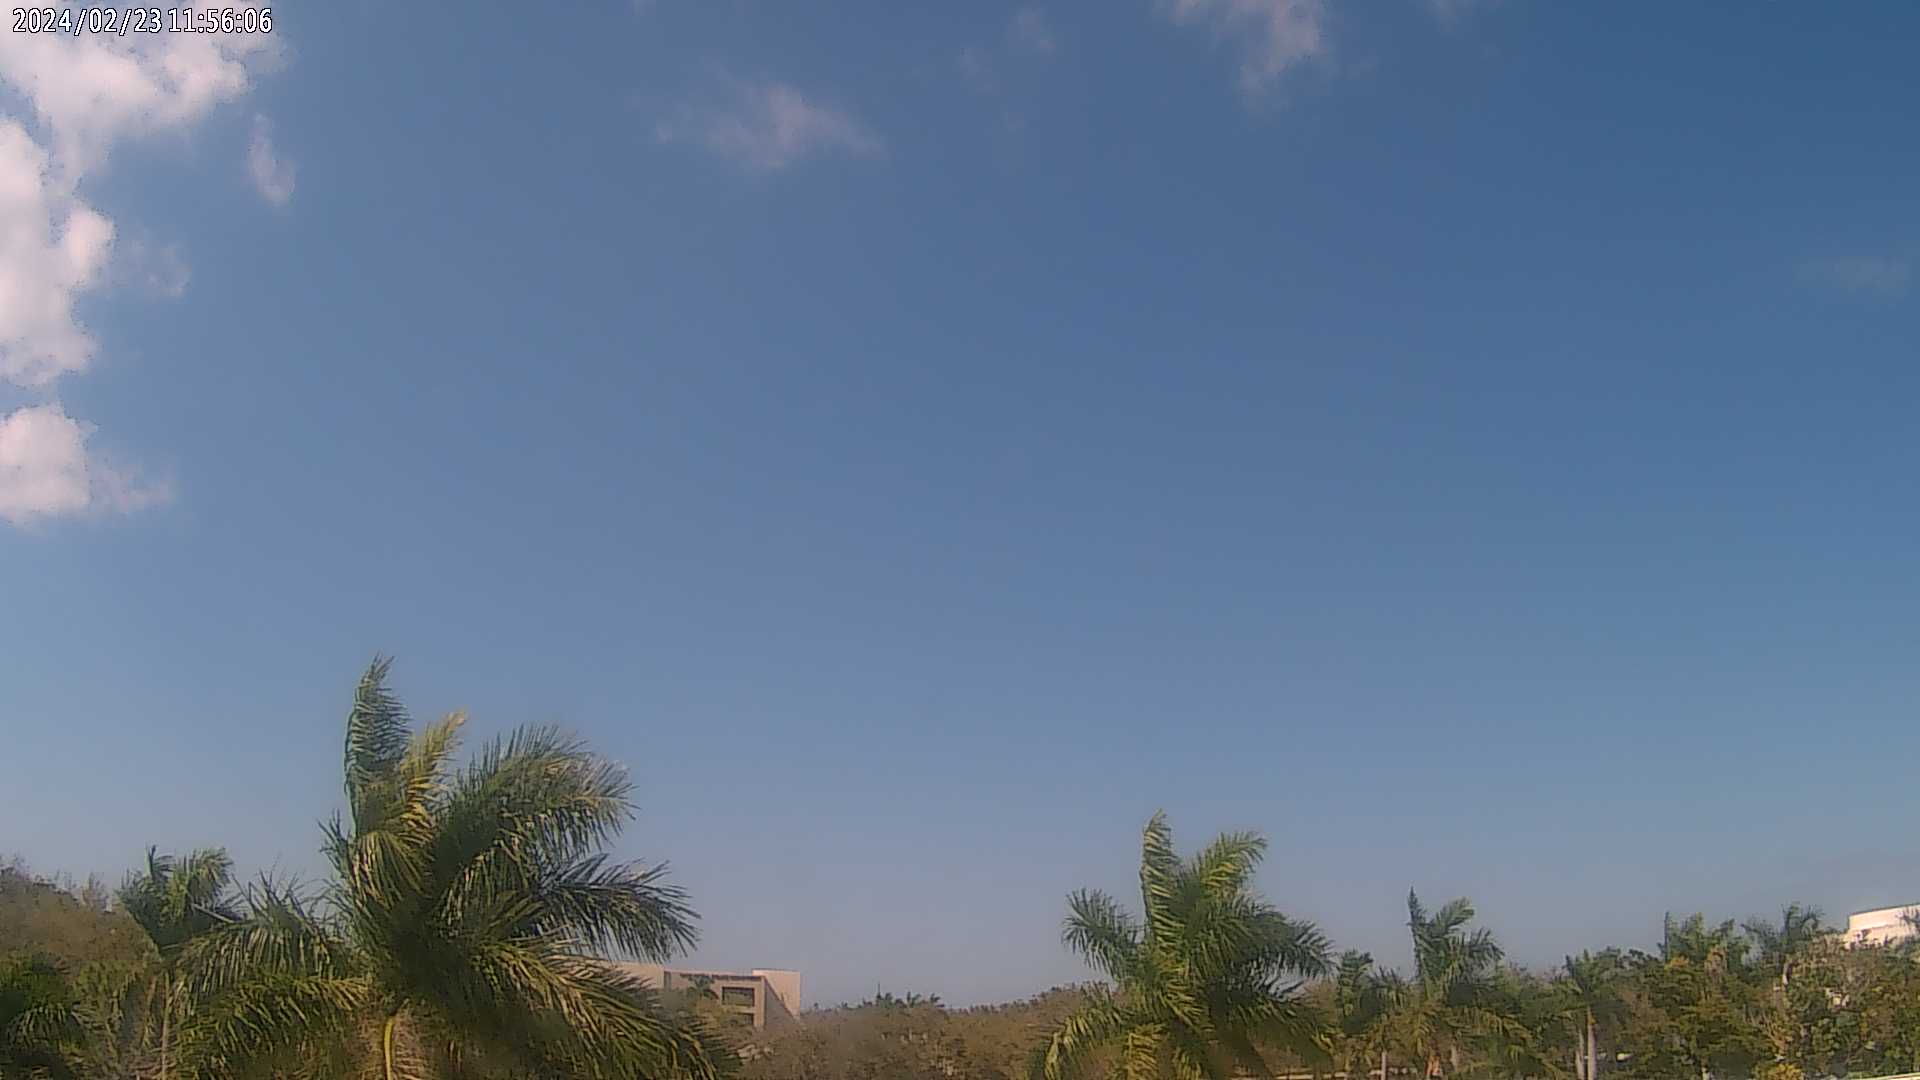  WeatherSTEM Cloud Camera CapeCoralEOCWx in Lee County, Florida FL at Cape Coral Emergency Operations Center